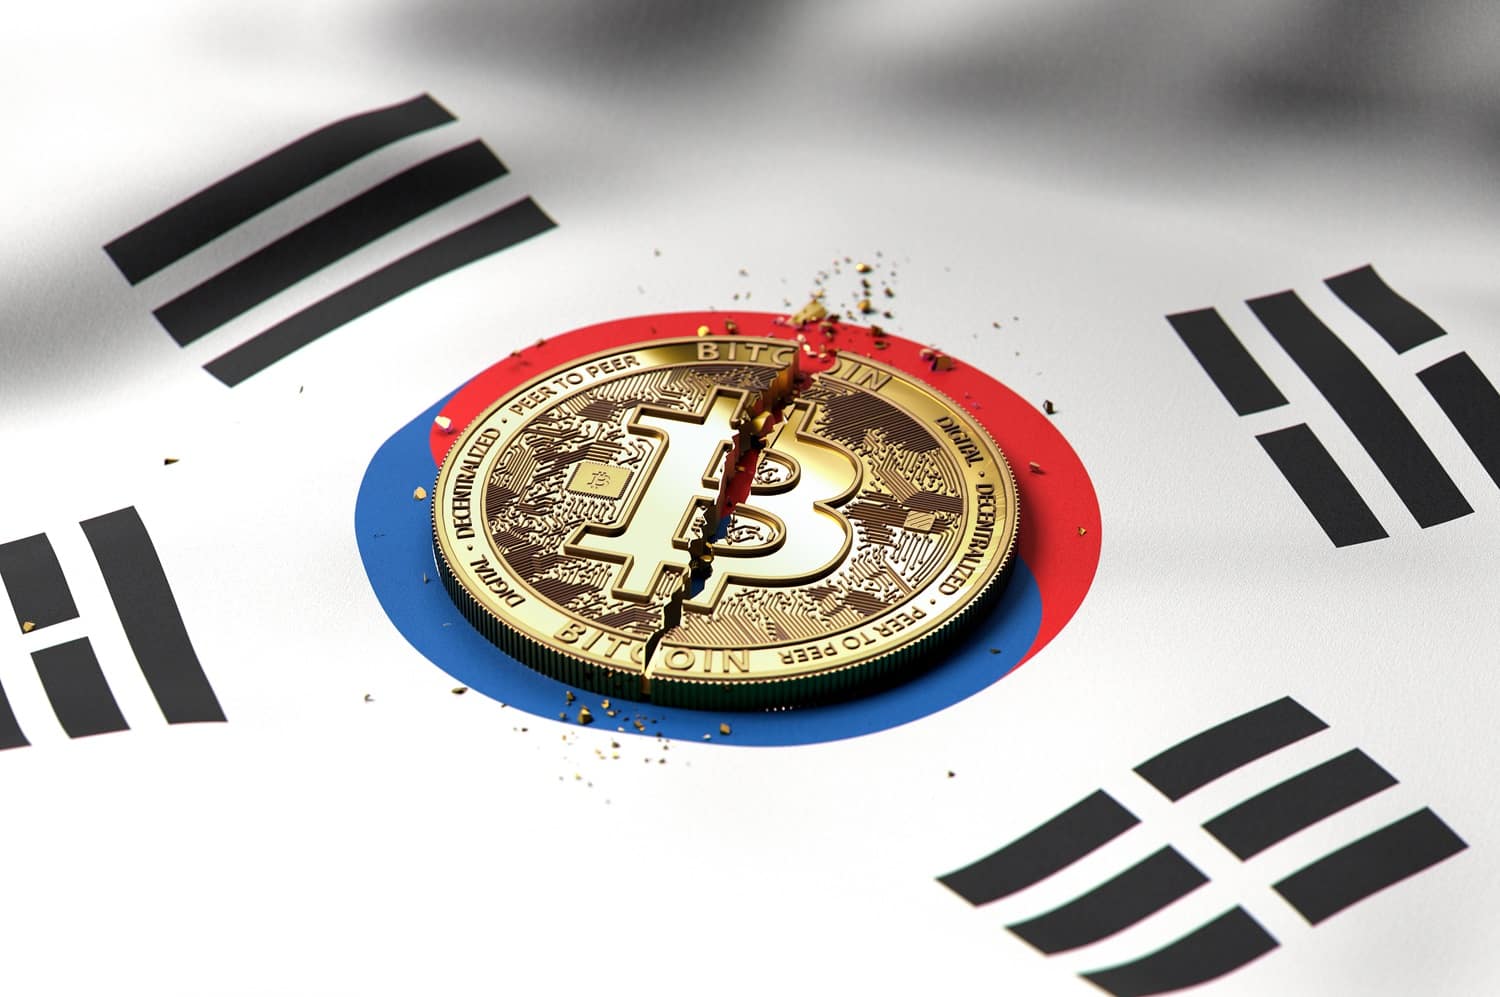 A cracked metal token intended to represent Bitcoin rests on the South Korean flag.